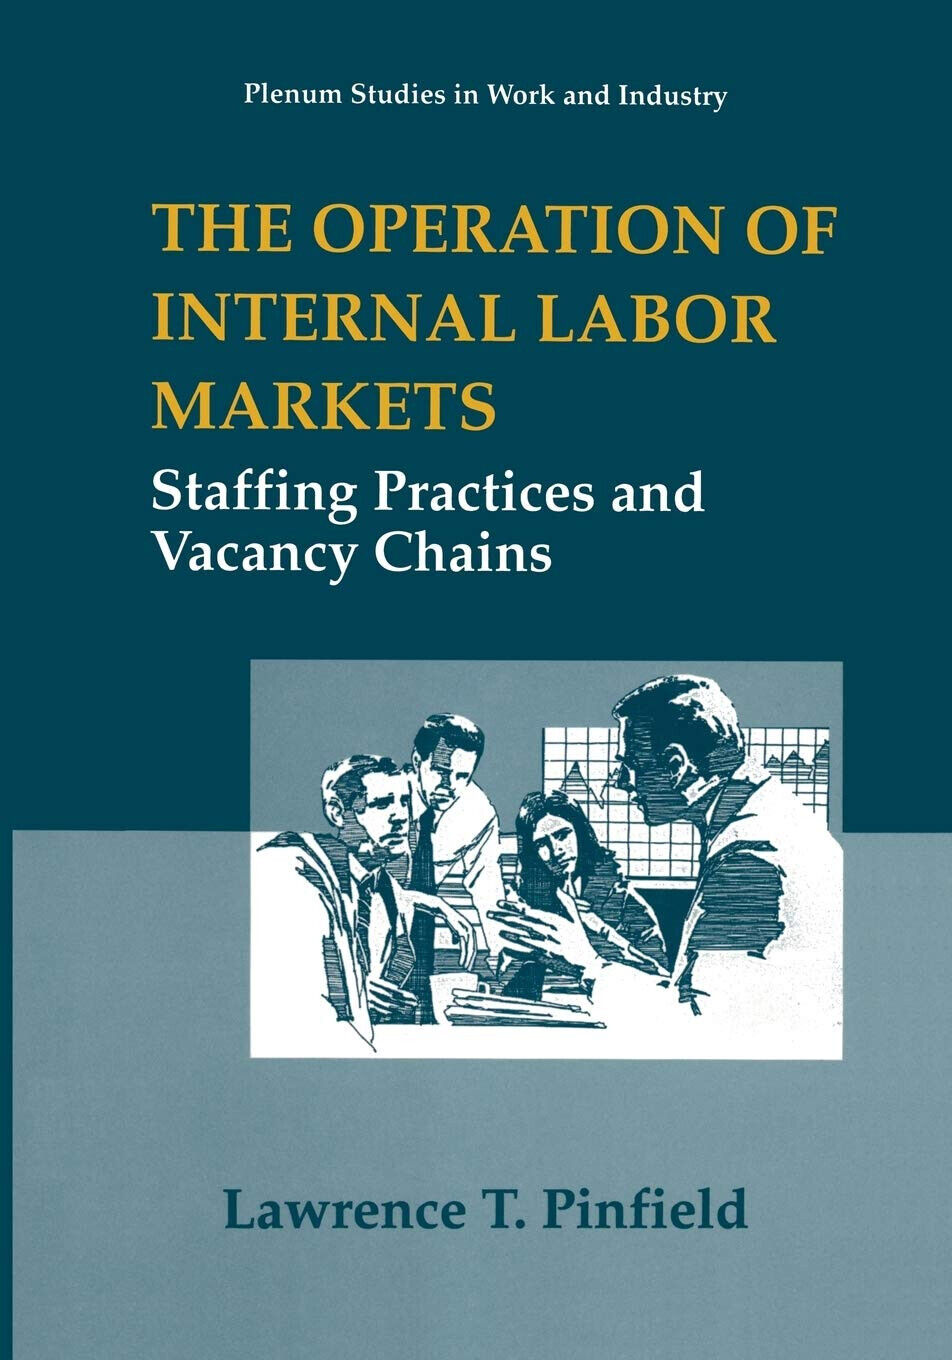 The Operation of Internal Labor Markets - Lawrence T. Pinfield - Springer, 2013